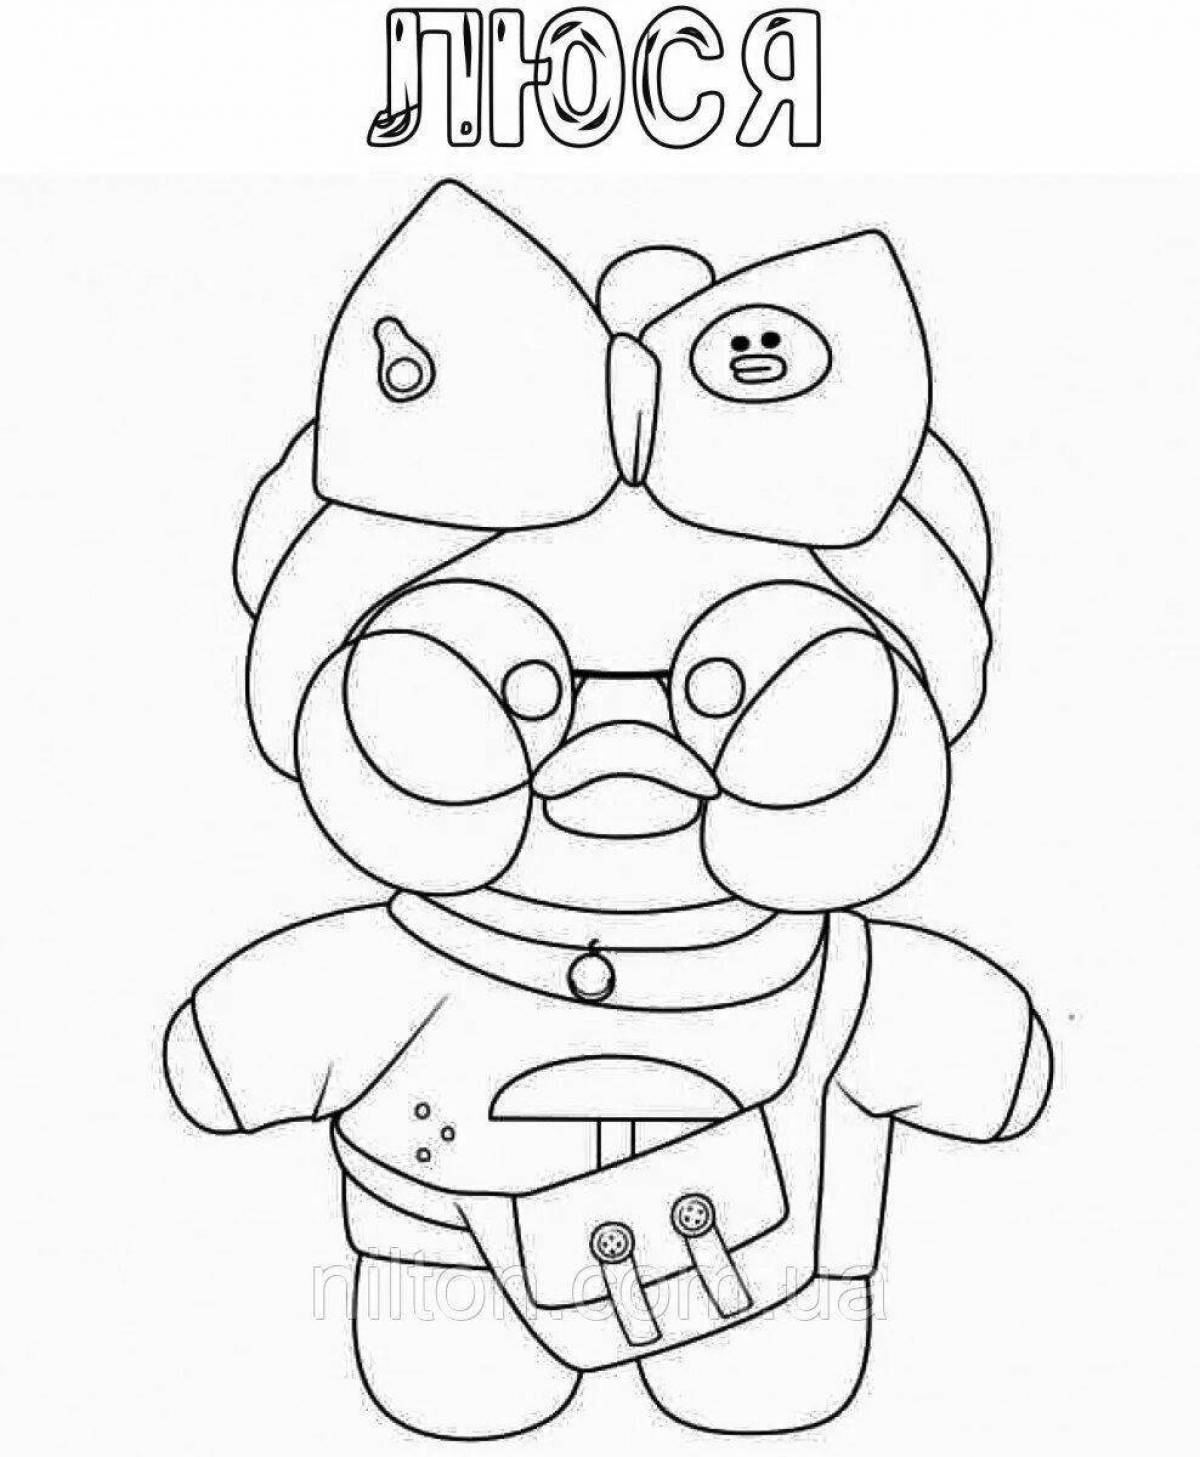 Great duck coloring page from tik tok